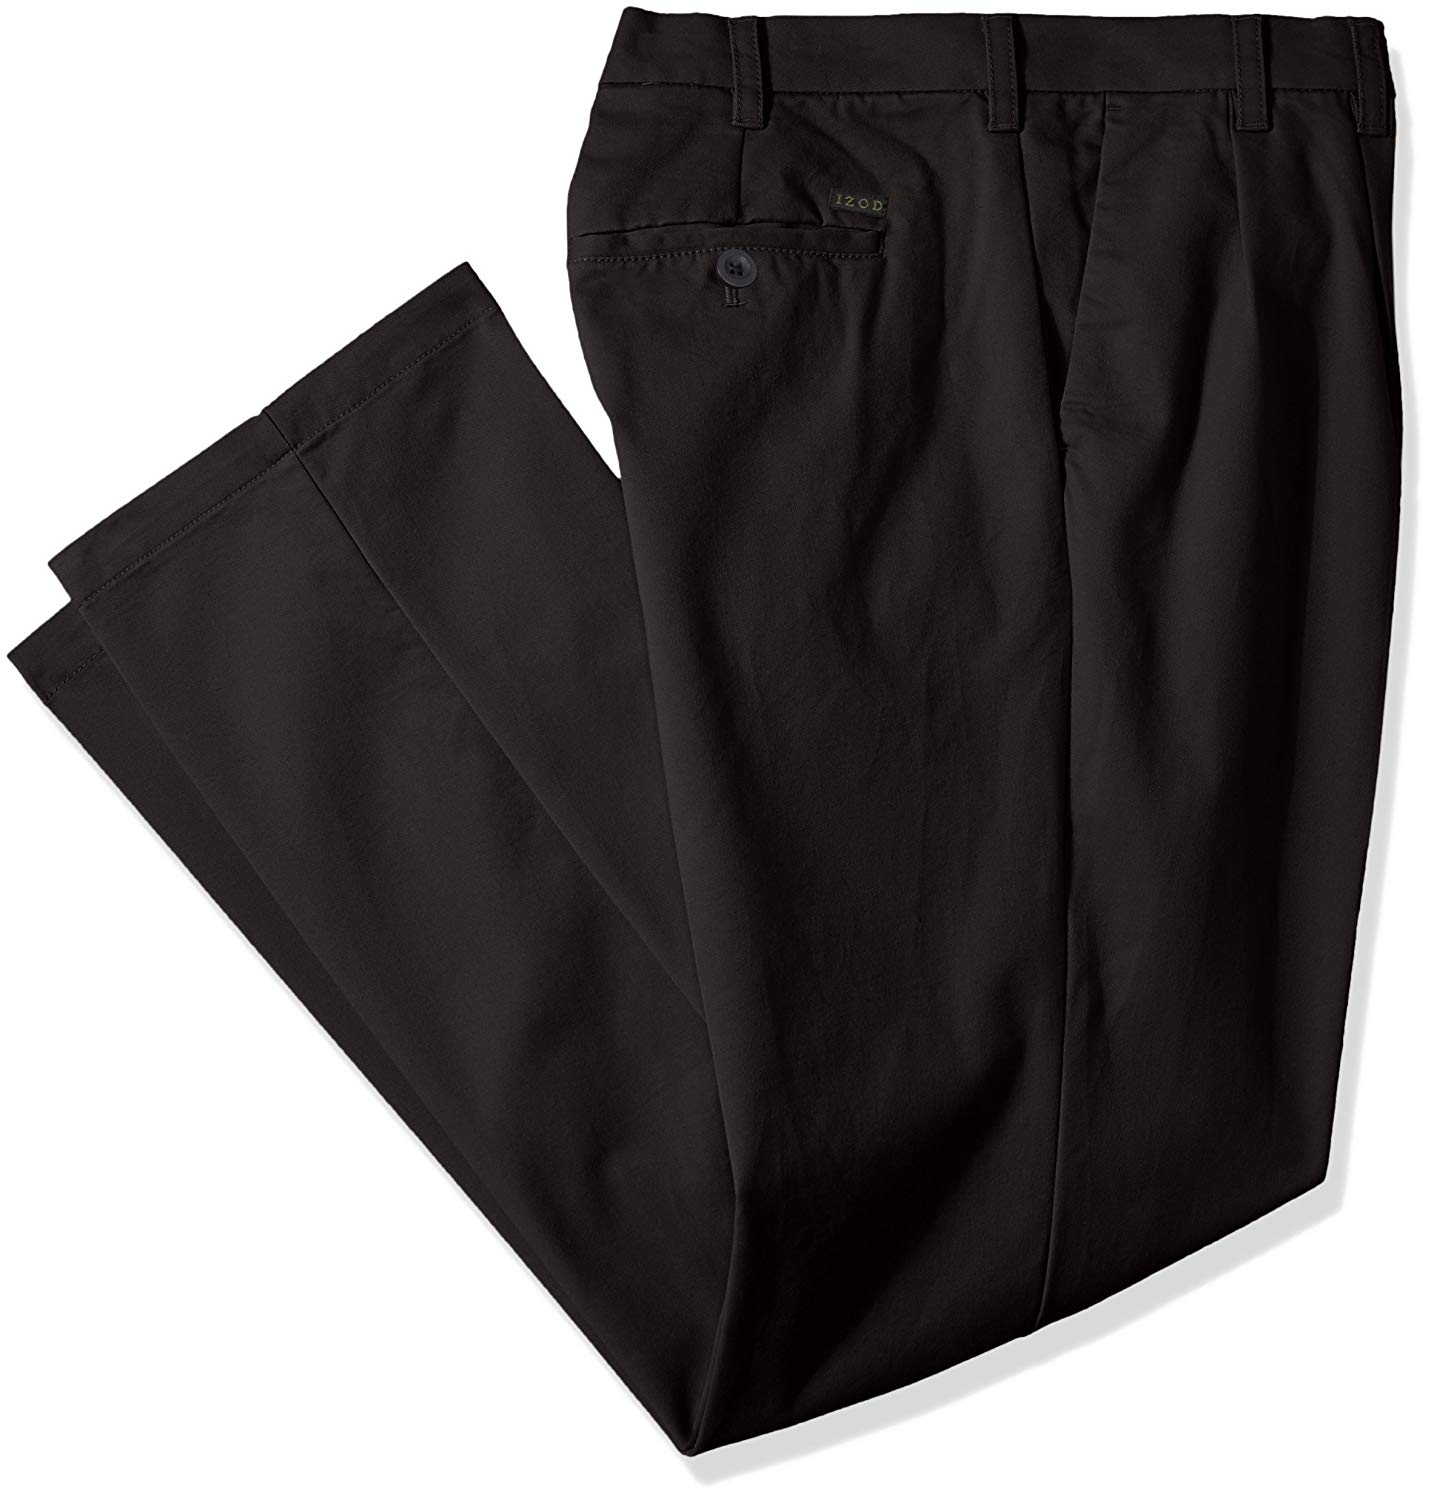 IZOD Men's Big and Tall Performance Stretch Pleated Pant,, Black, Size ...